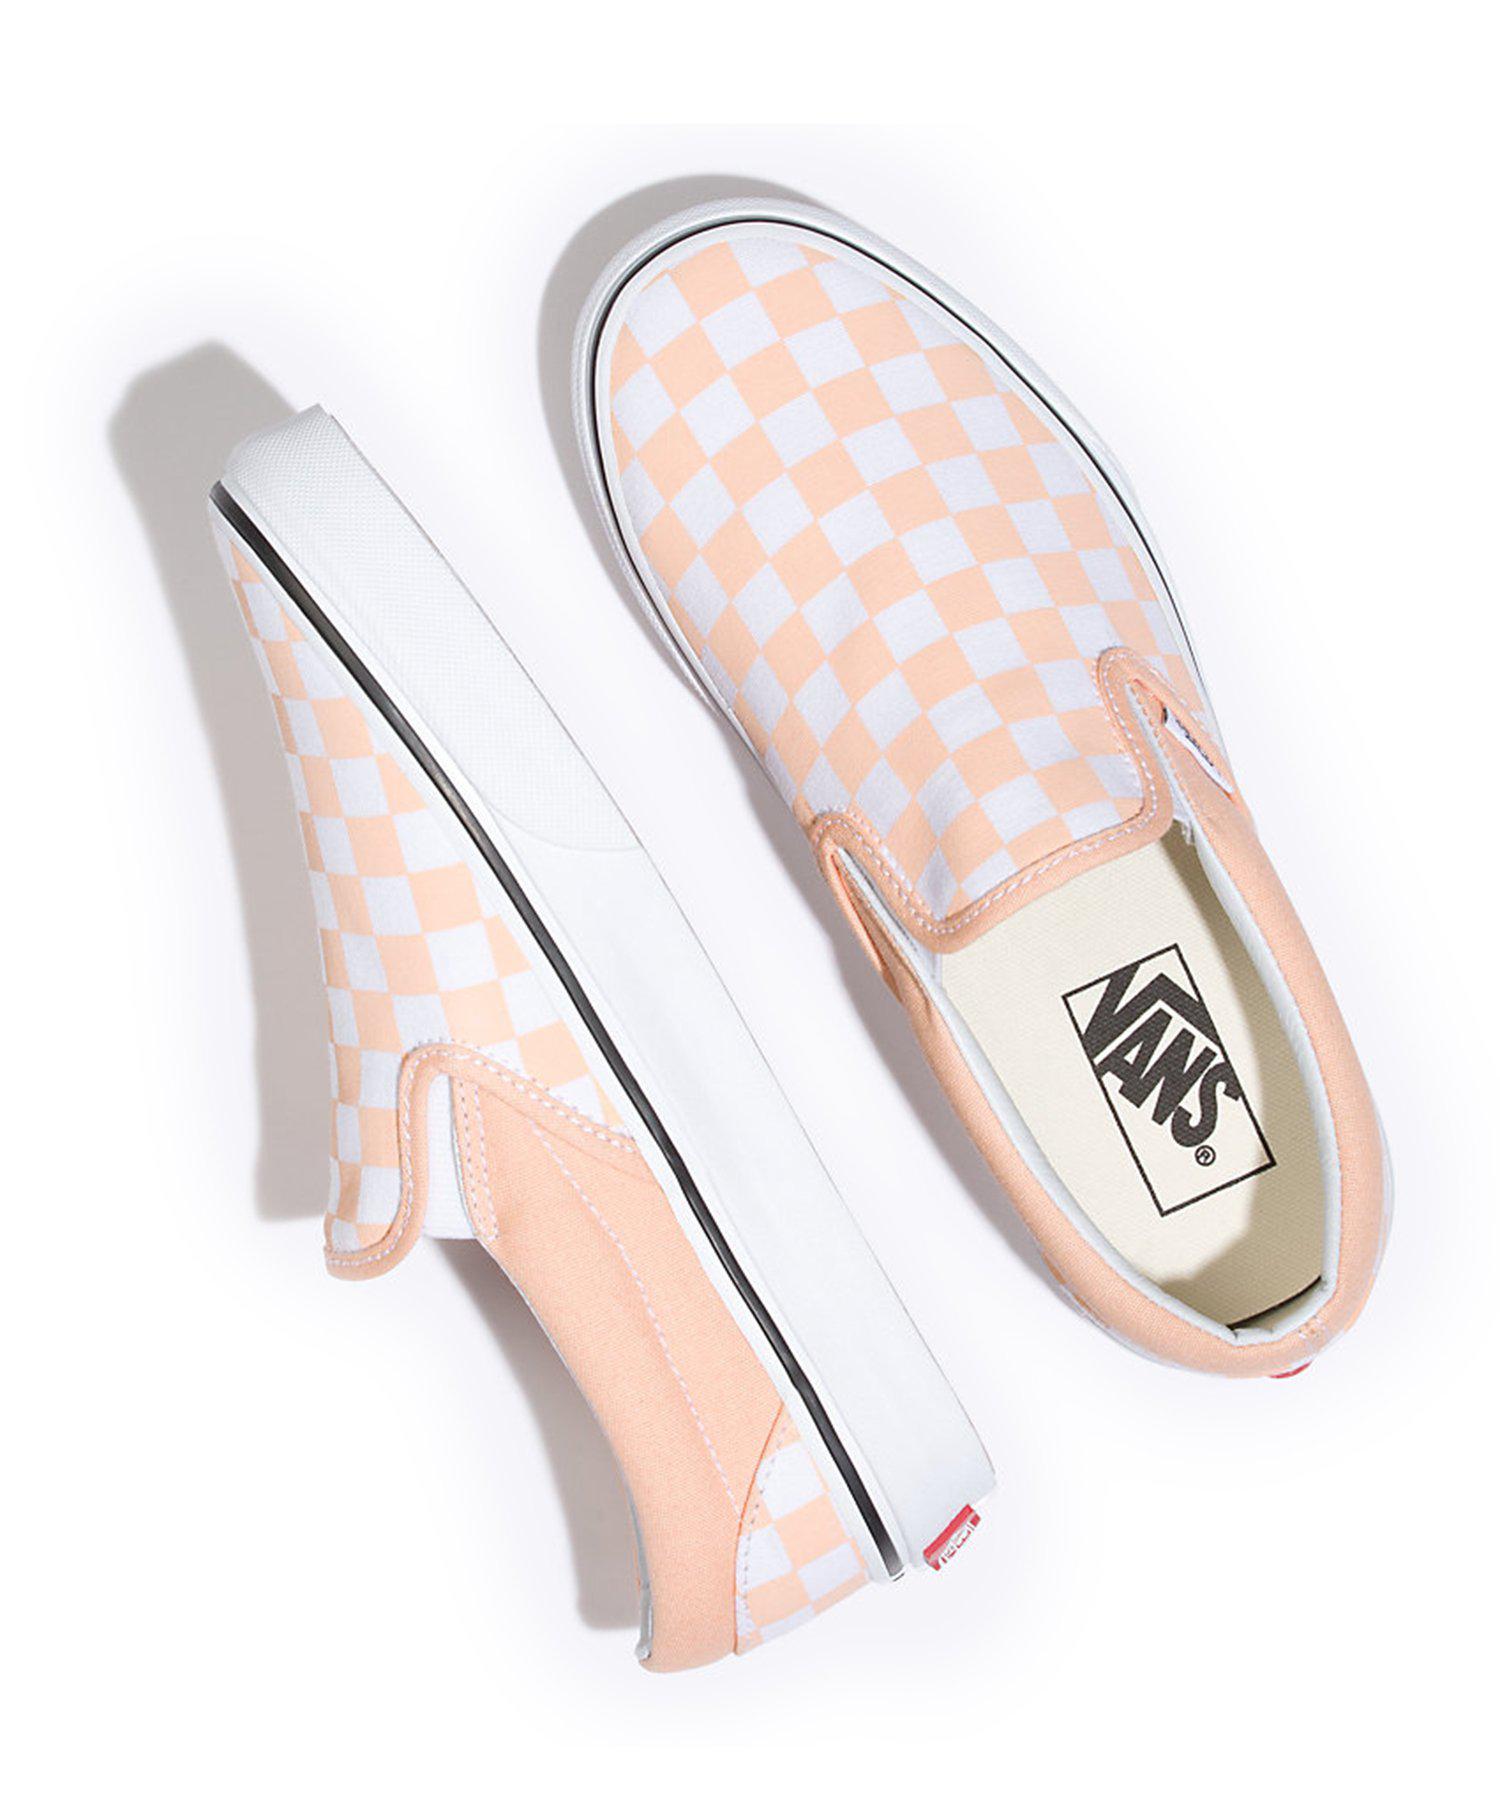 Vans Canvas Classic Checkerboard Slip-on In Bleached Apricot in for Men - Lyst